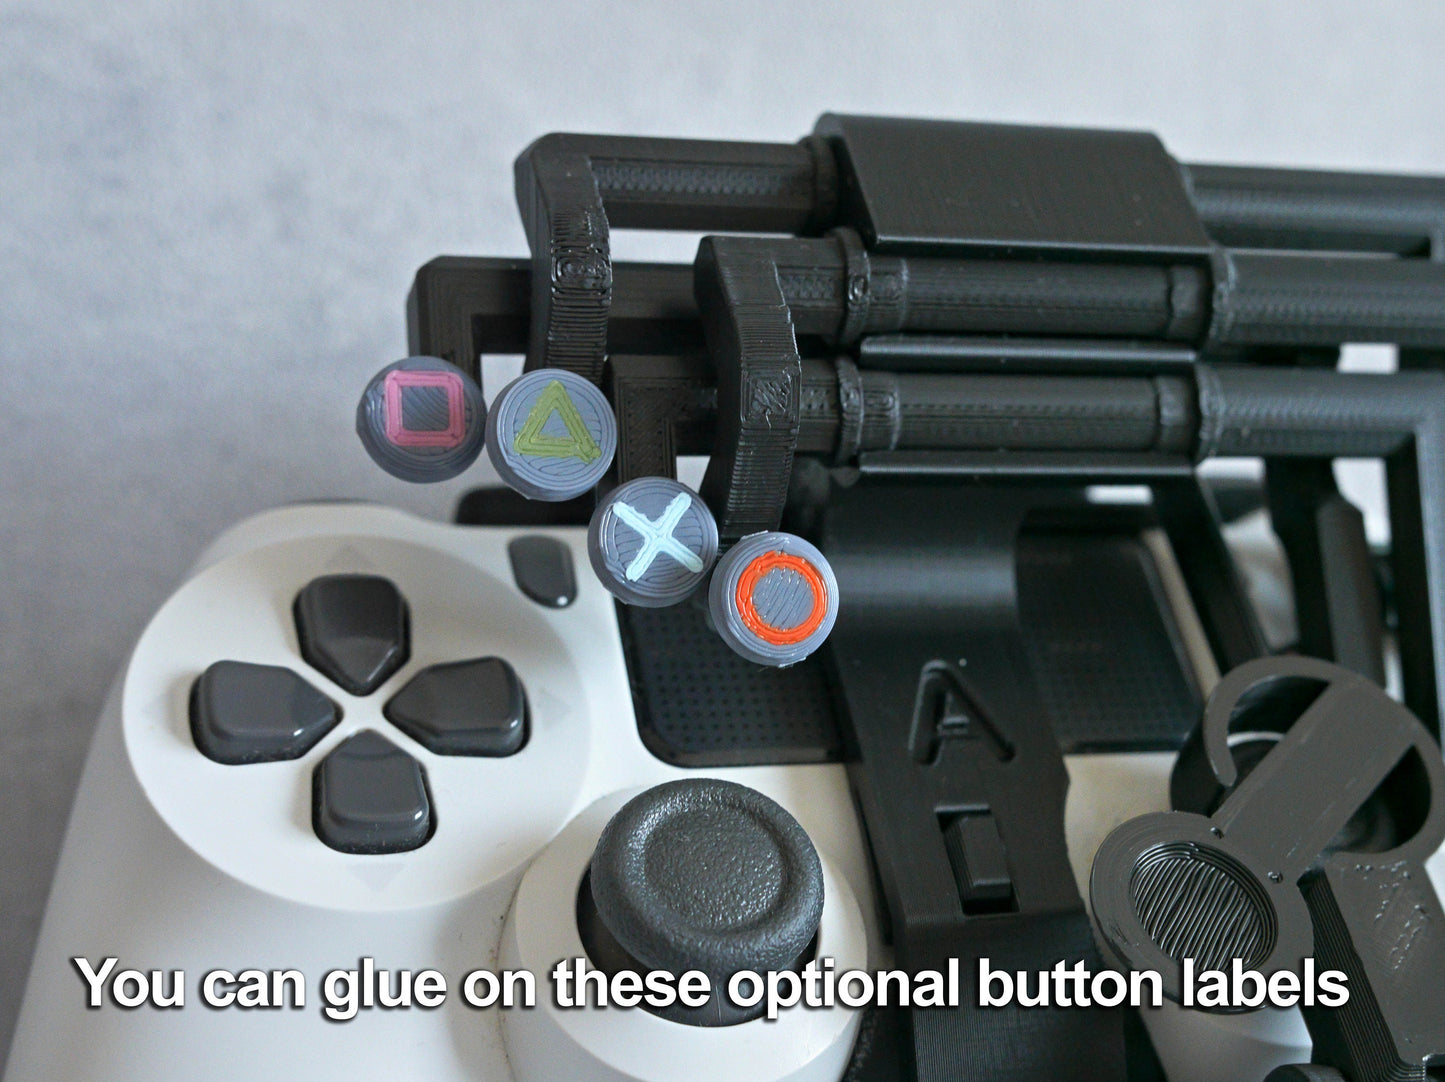 One-handed DualShock 4 Attachment